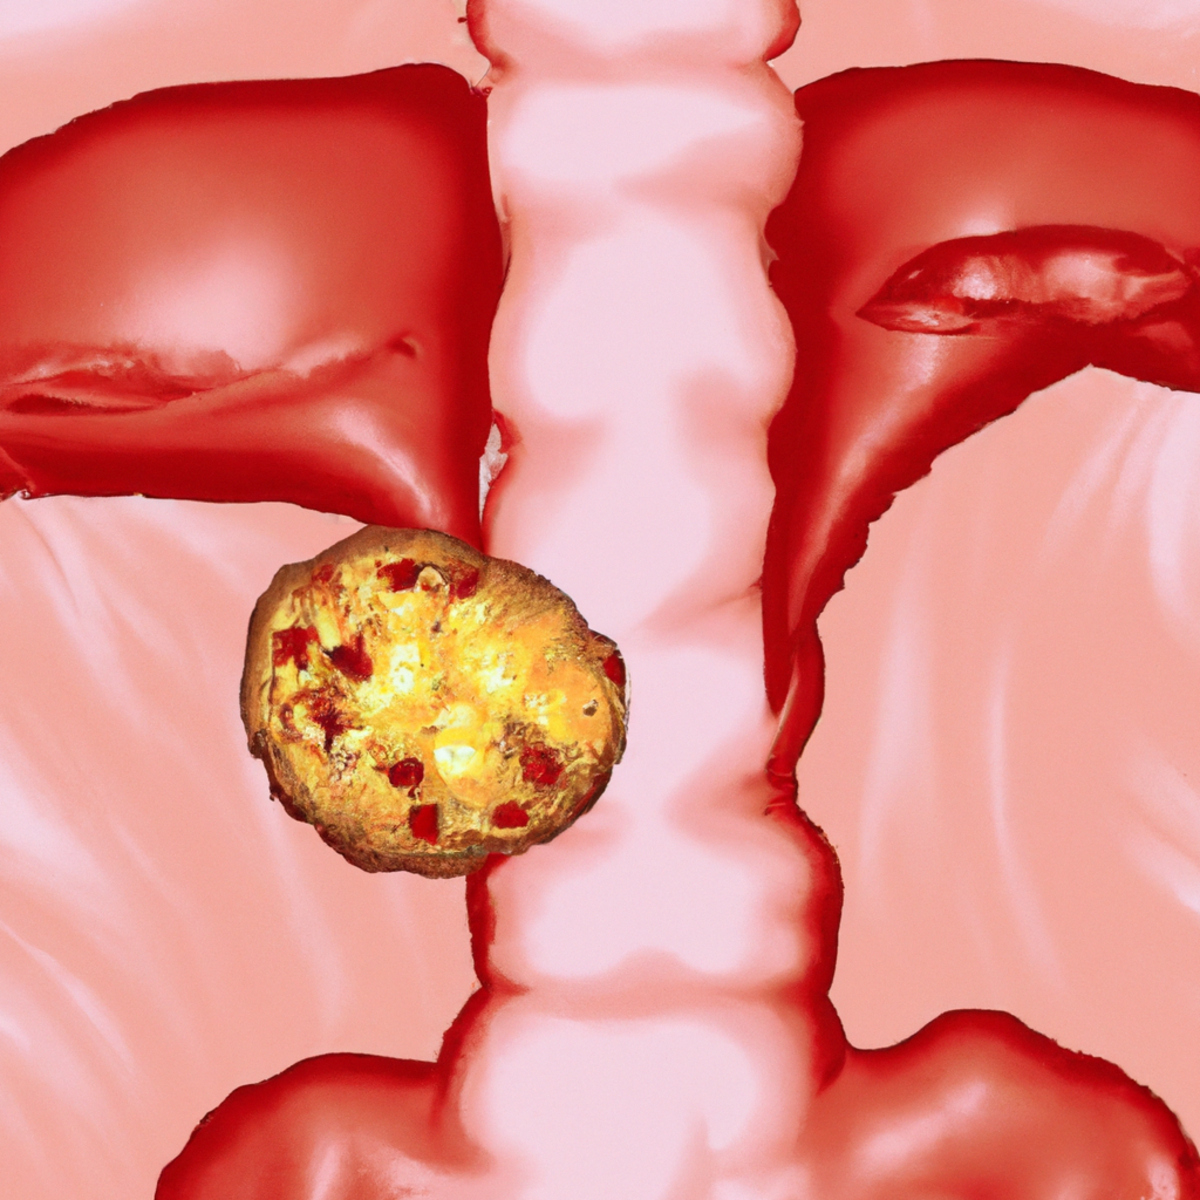 Inflamed gallbladder affected by Xanthogranulomatous Cholecystitis, showcasing distinct yellowish appearance and anatomical structures.